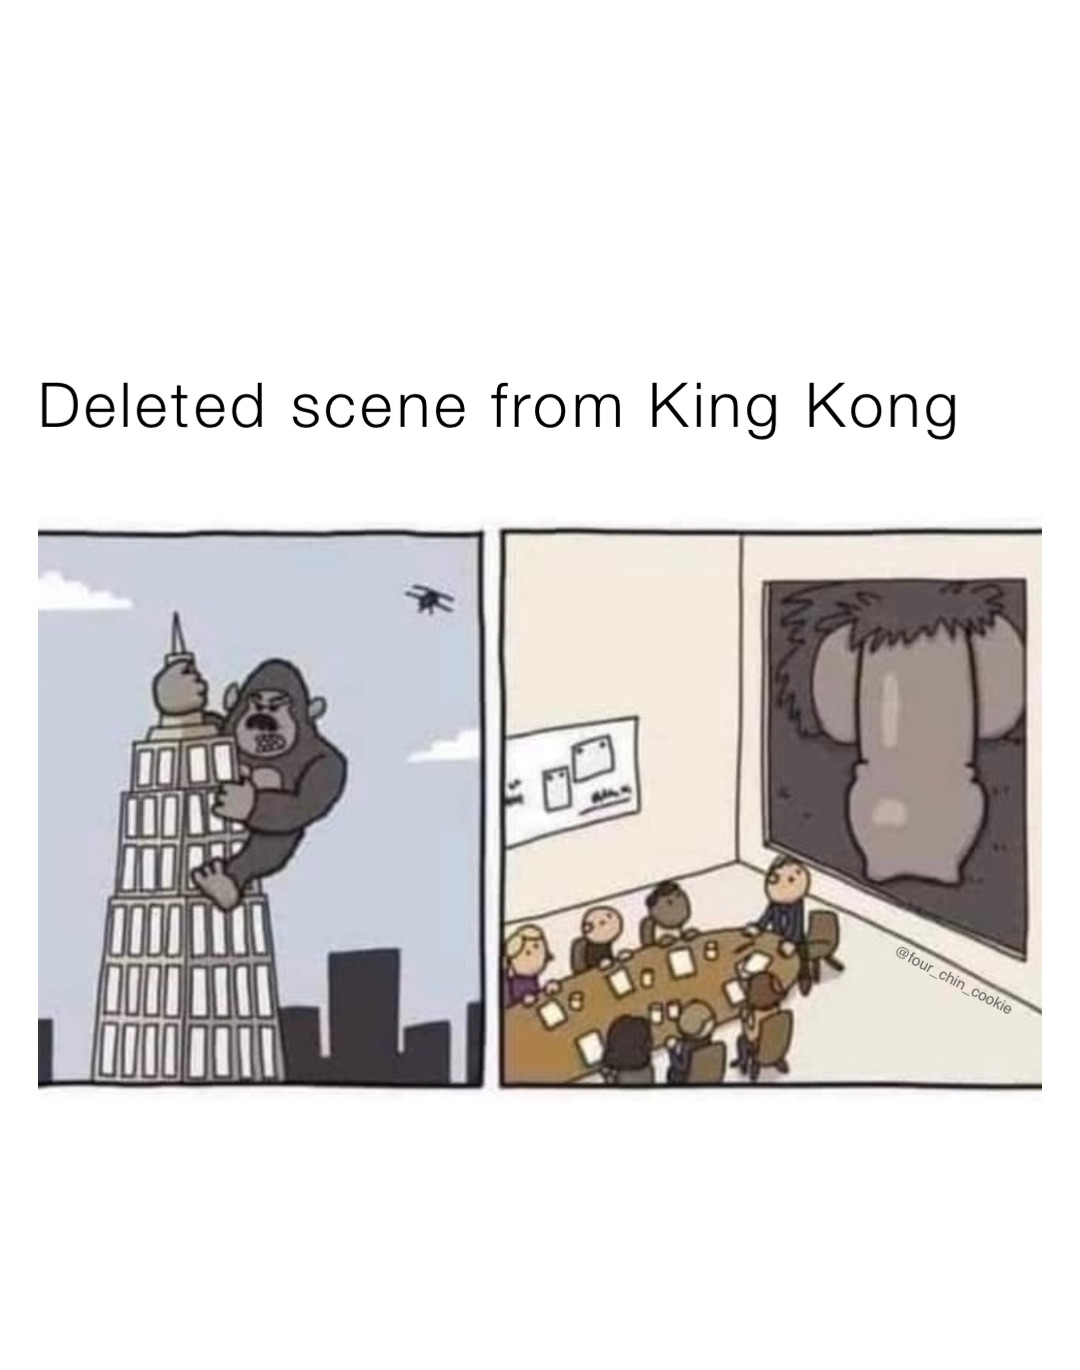 Deleted scene from King Kong